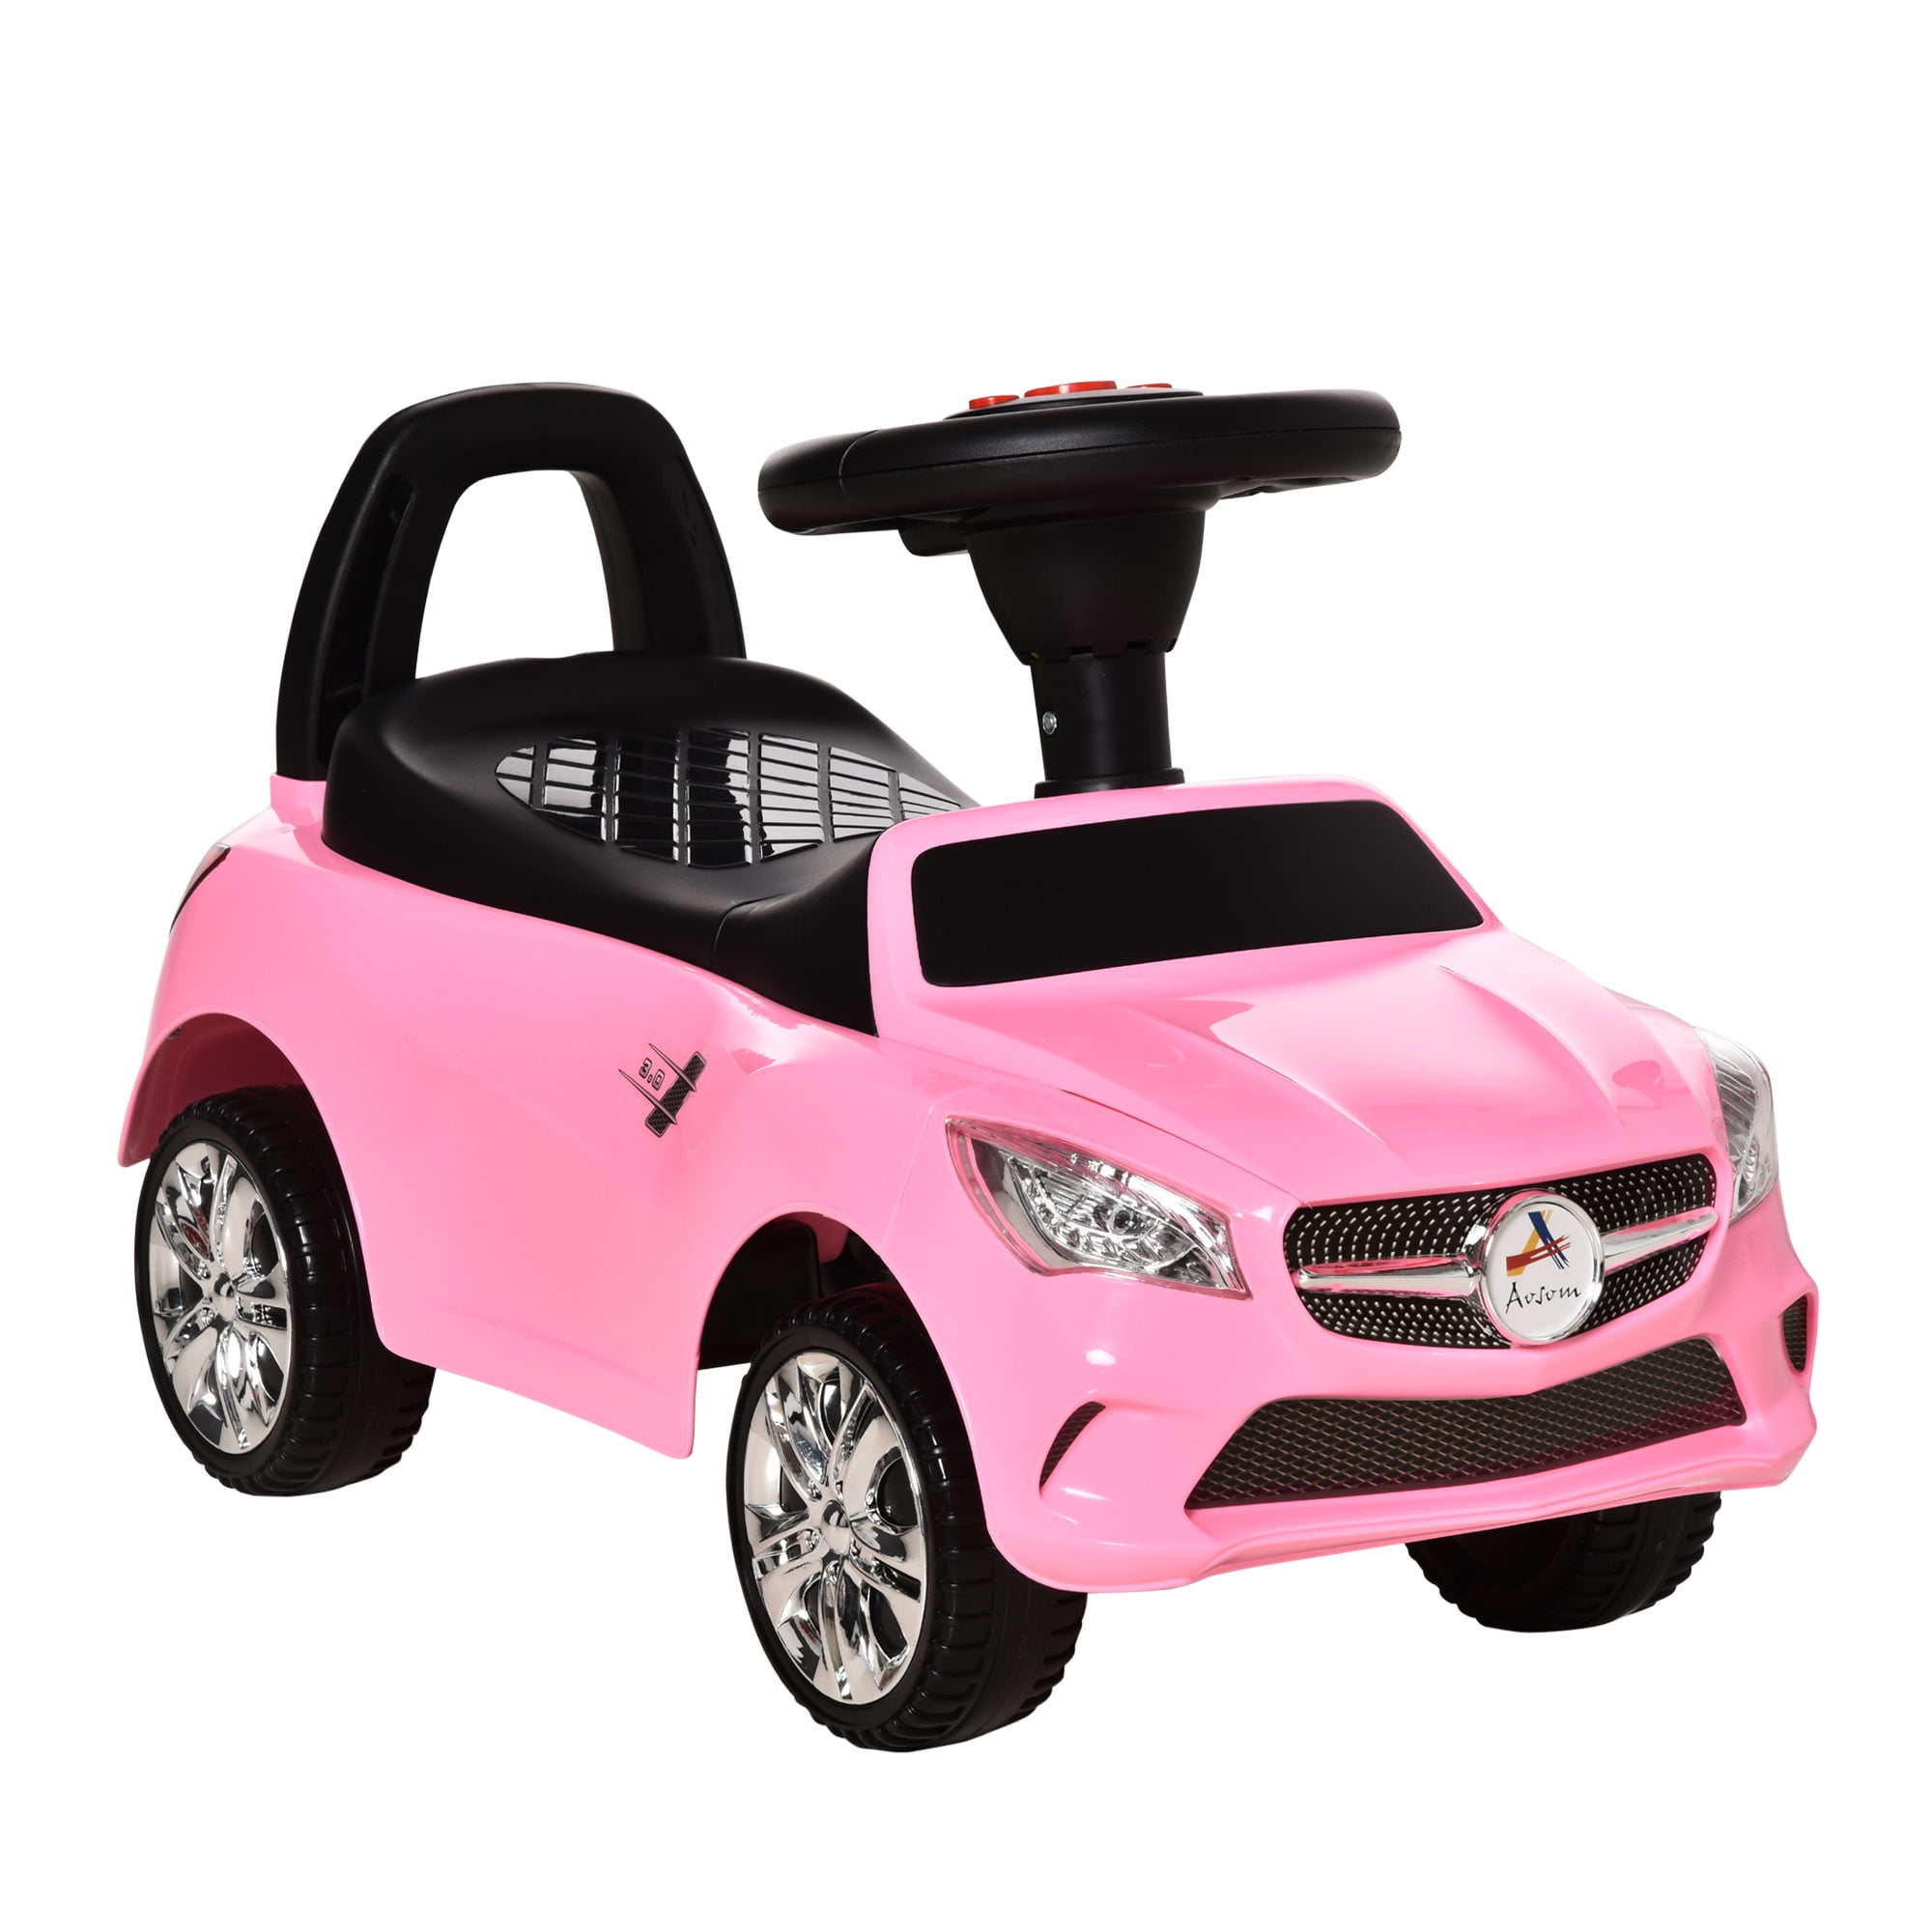 Turn Toys 80-1277HP for Toddlers Kids Gears or Pedals 2 Years Old and Up Trademark Global Wiggle Movement to Steer Zigzag Car-Pink Ride On Car No Batteries Uses Twist